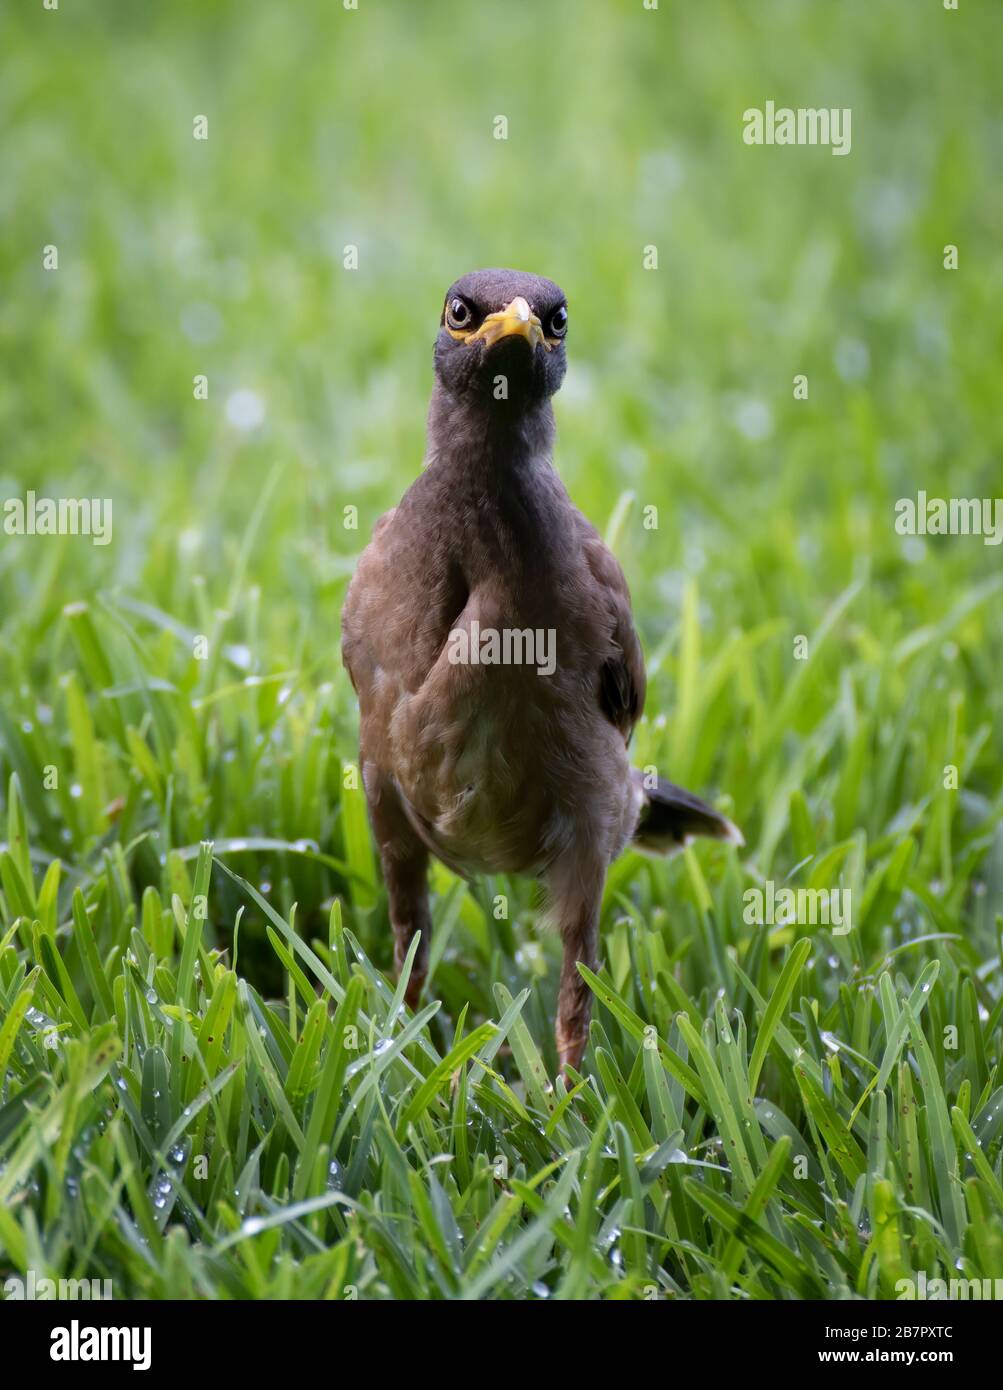 Myna bird stares at the camera while standing in green grass in Hawaii. Stock Photo